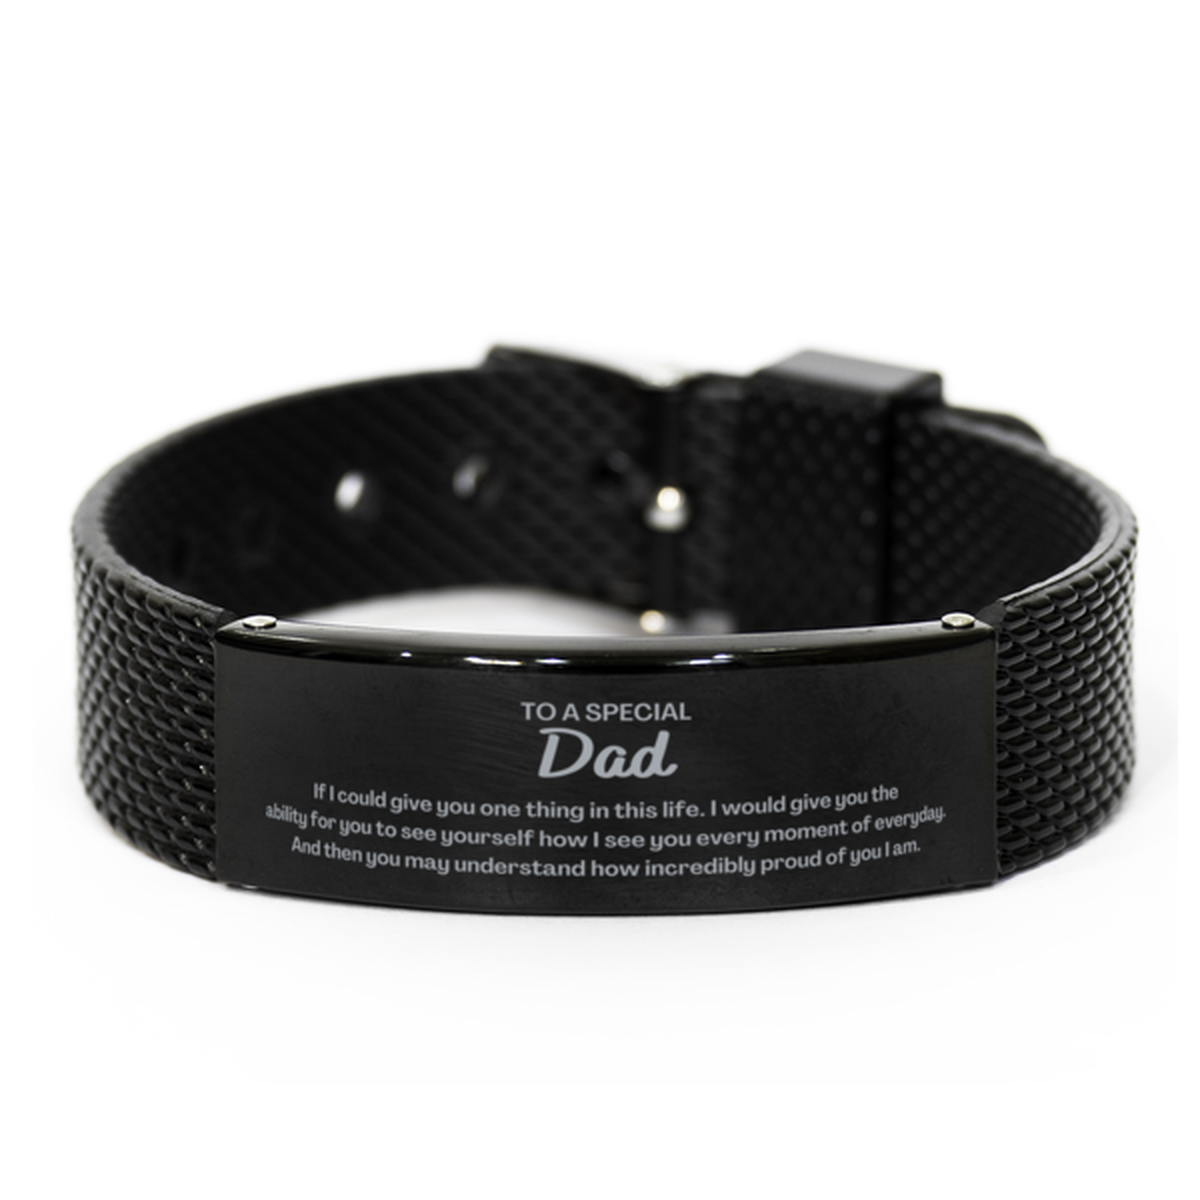 To My Dad Black Shark Mesh Bracelet, Gifts For Dad Engraved, Inspirational Gifts for Christmas Birthday, Epic Gifts for Dad To A Special Dad how incredibly proud of you I am